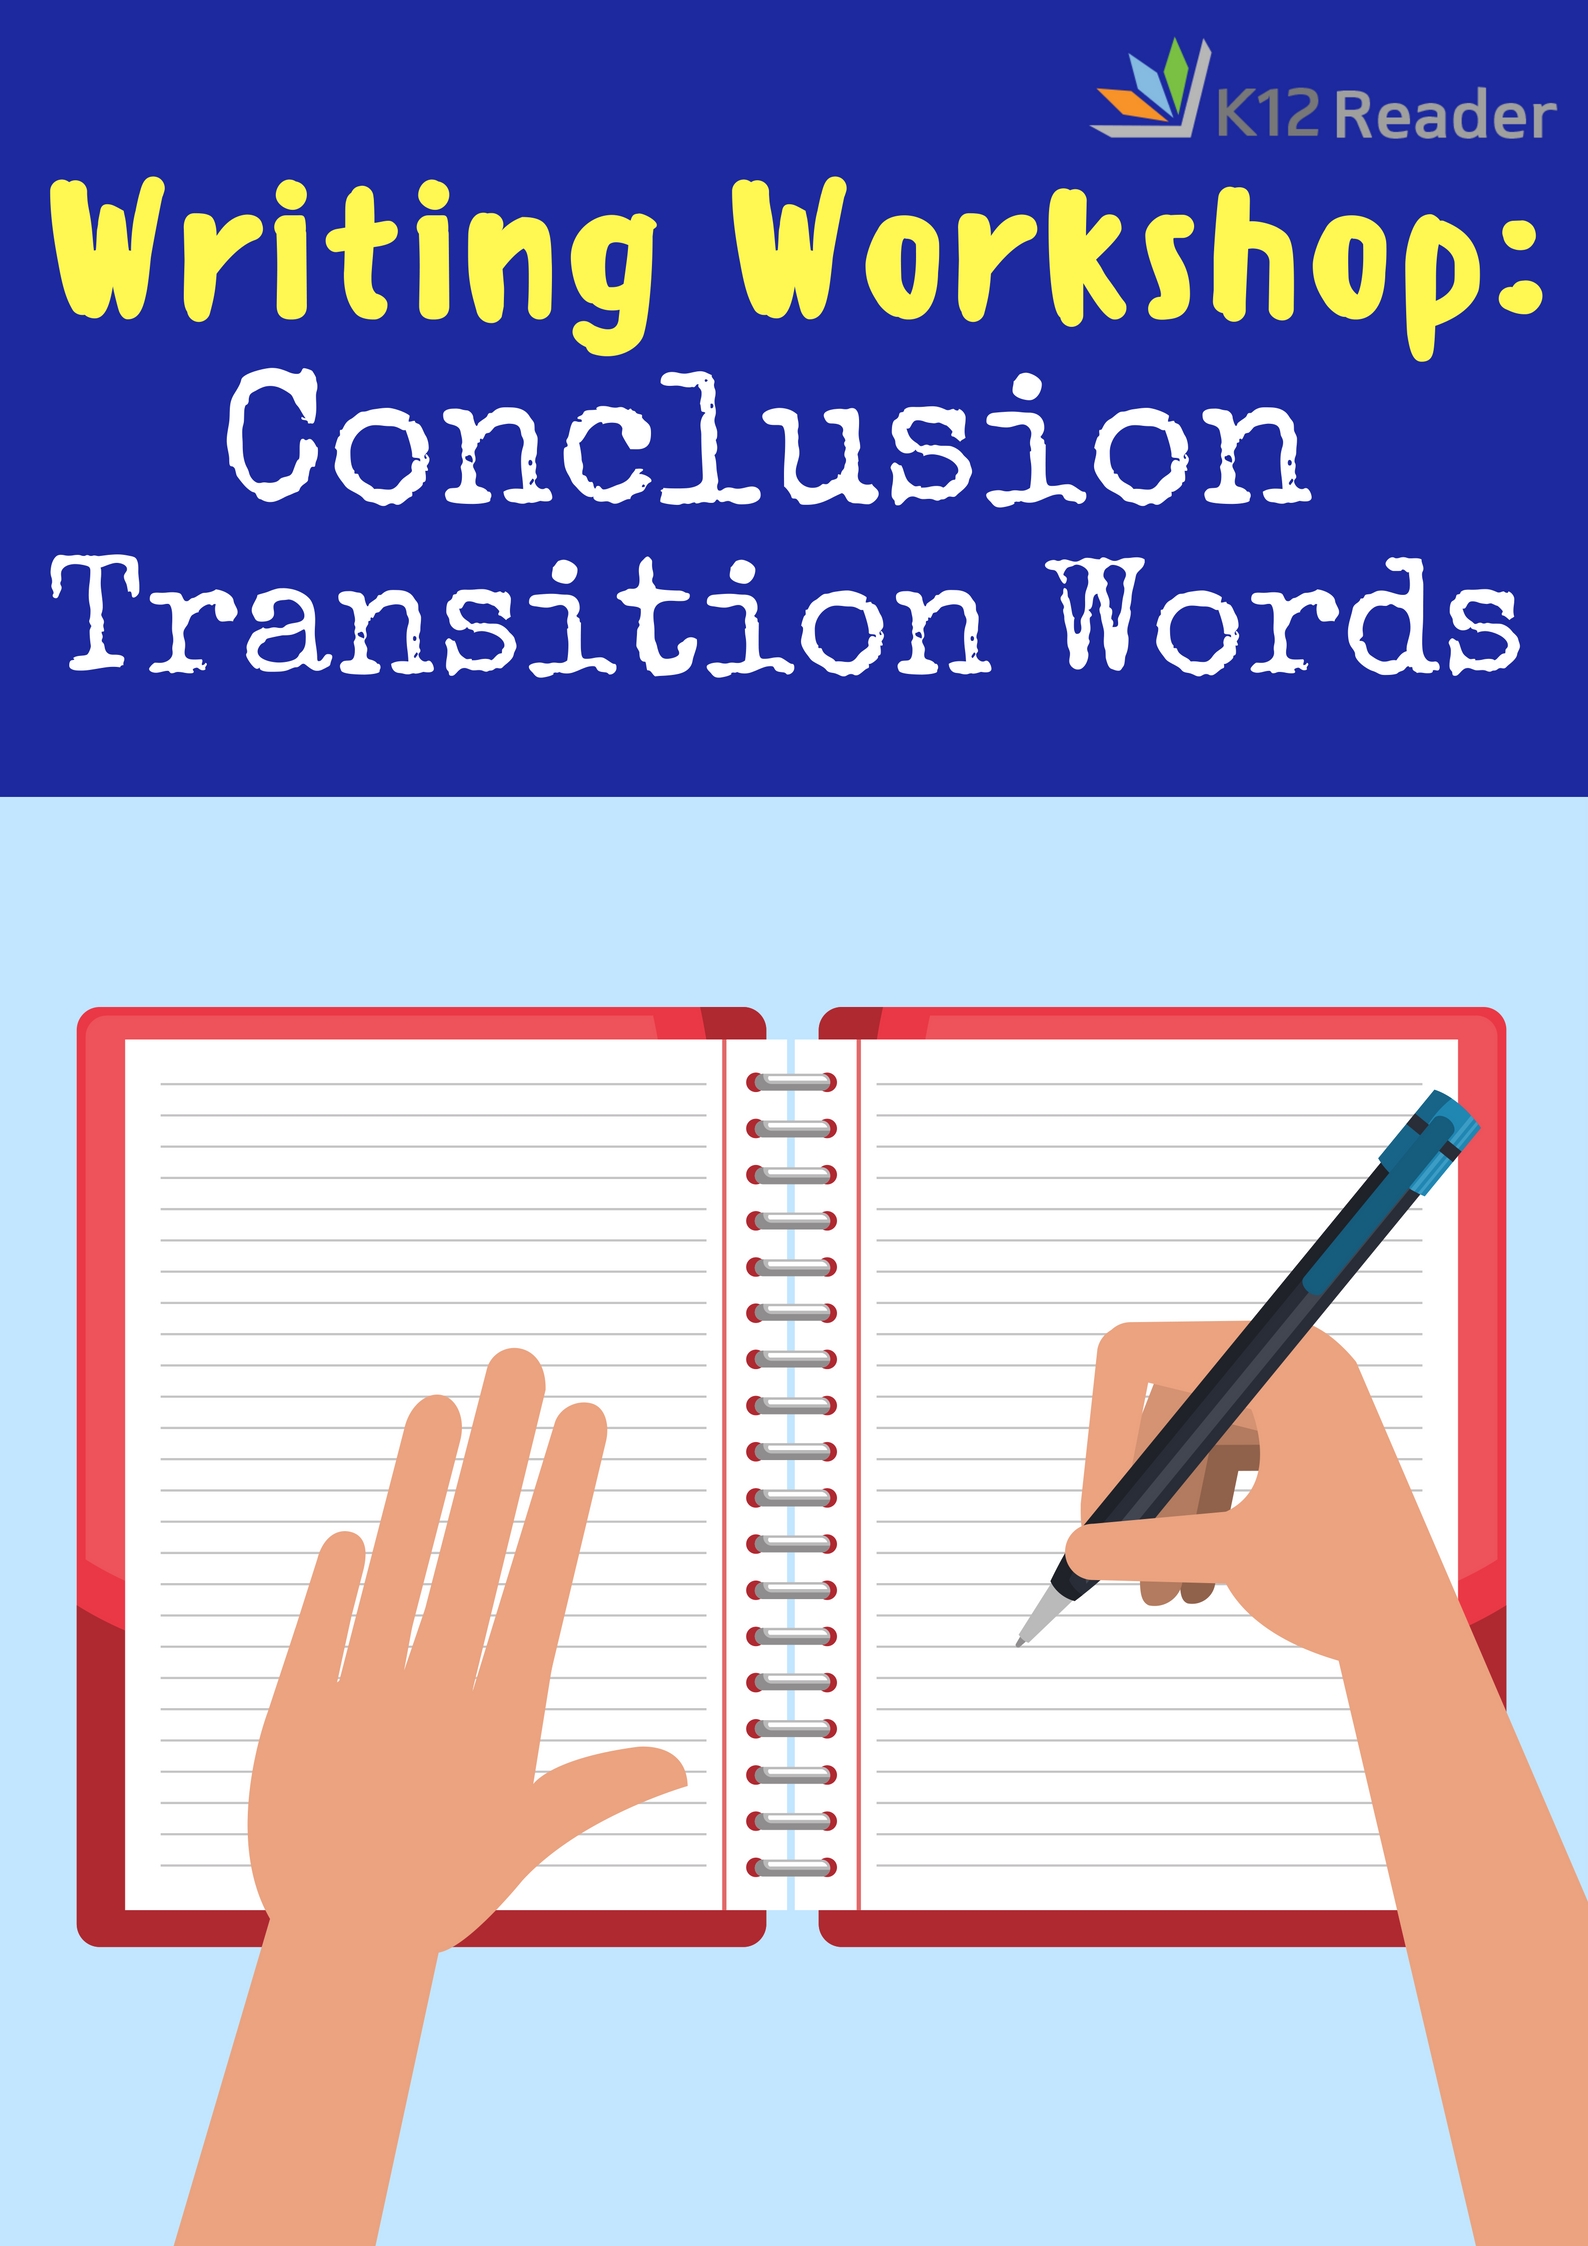 Transition Words To Start A Body Paragraph